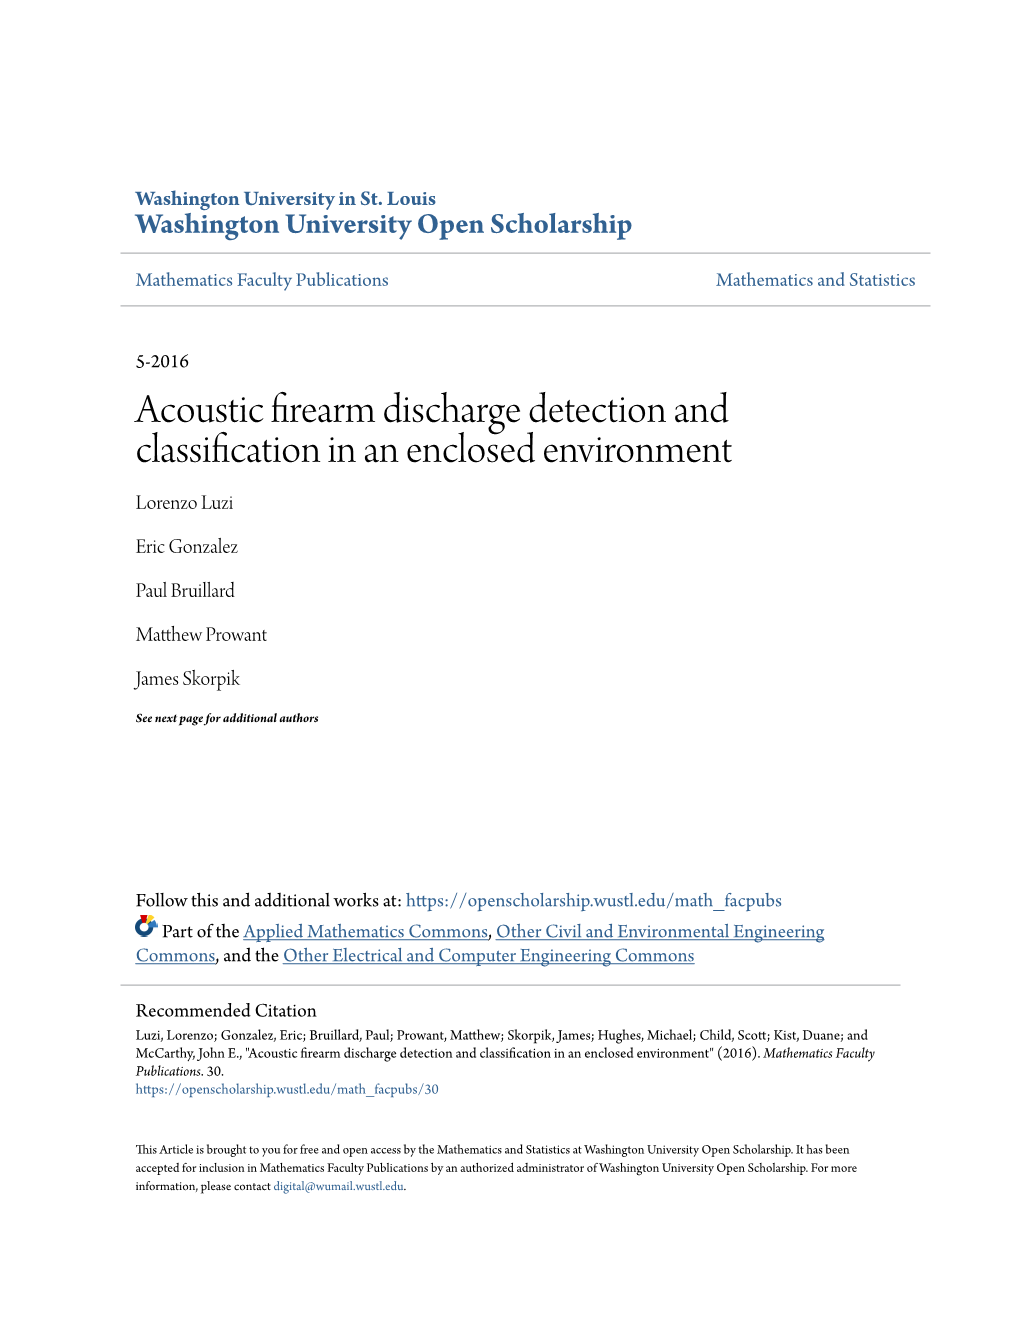 Acoustic Firearm Discharge Detection and Classification in an Enclosed Environment Lorenzo Luzi